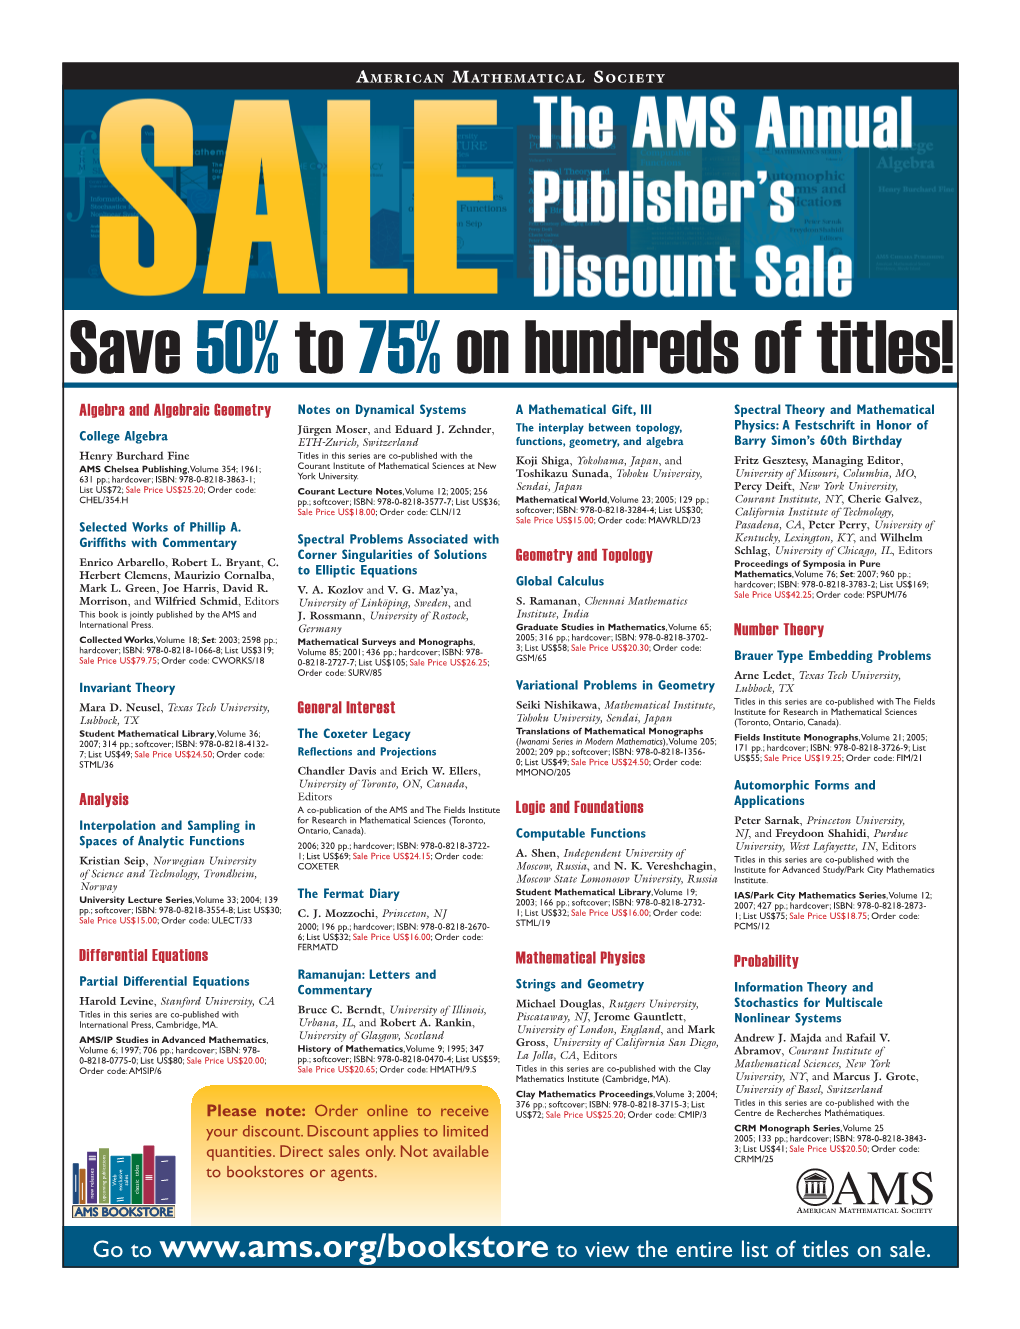 Save 50% to 75% on Hundreds of Titles!